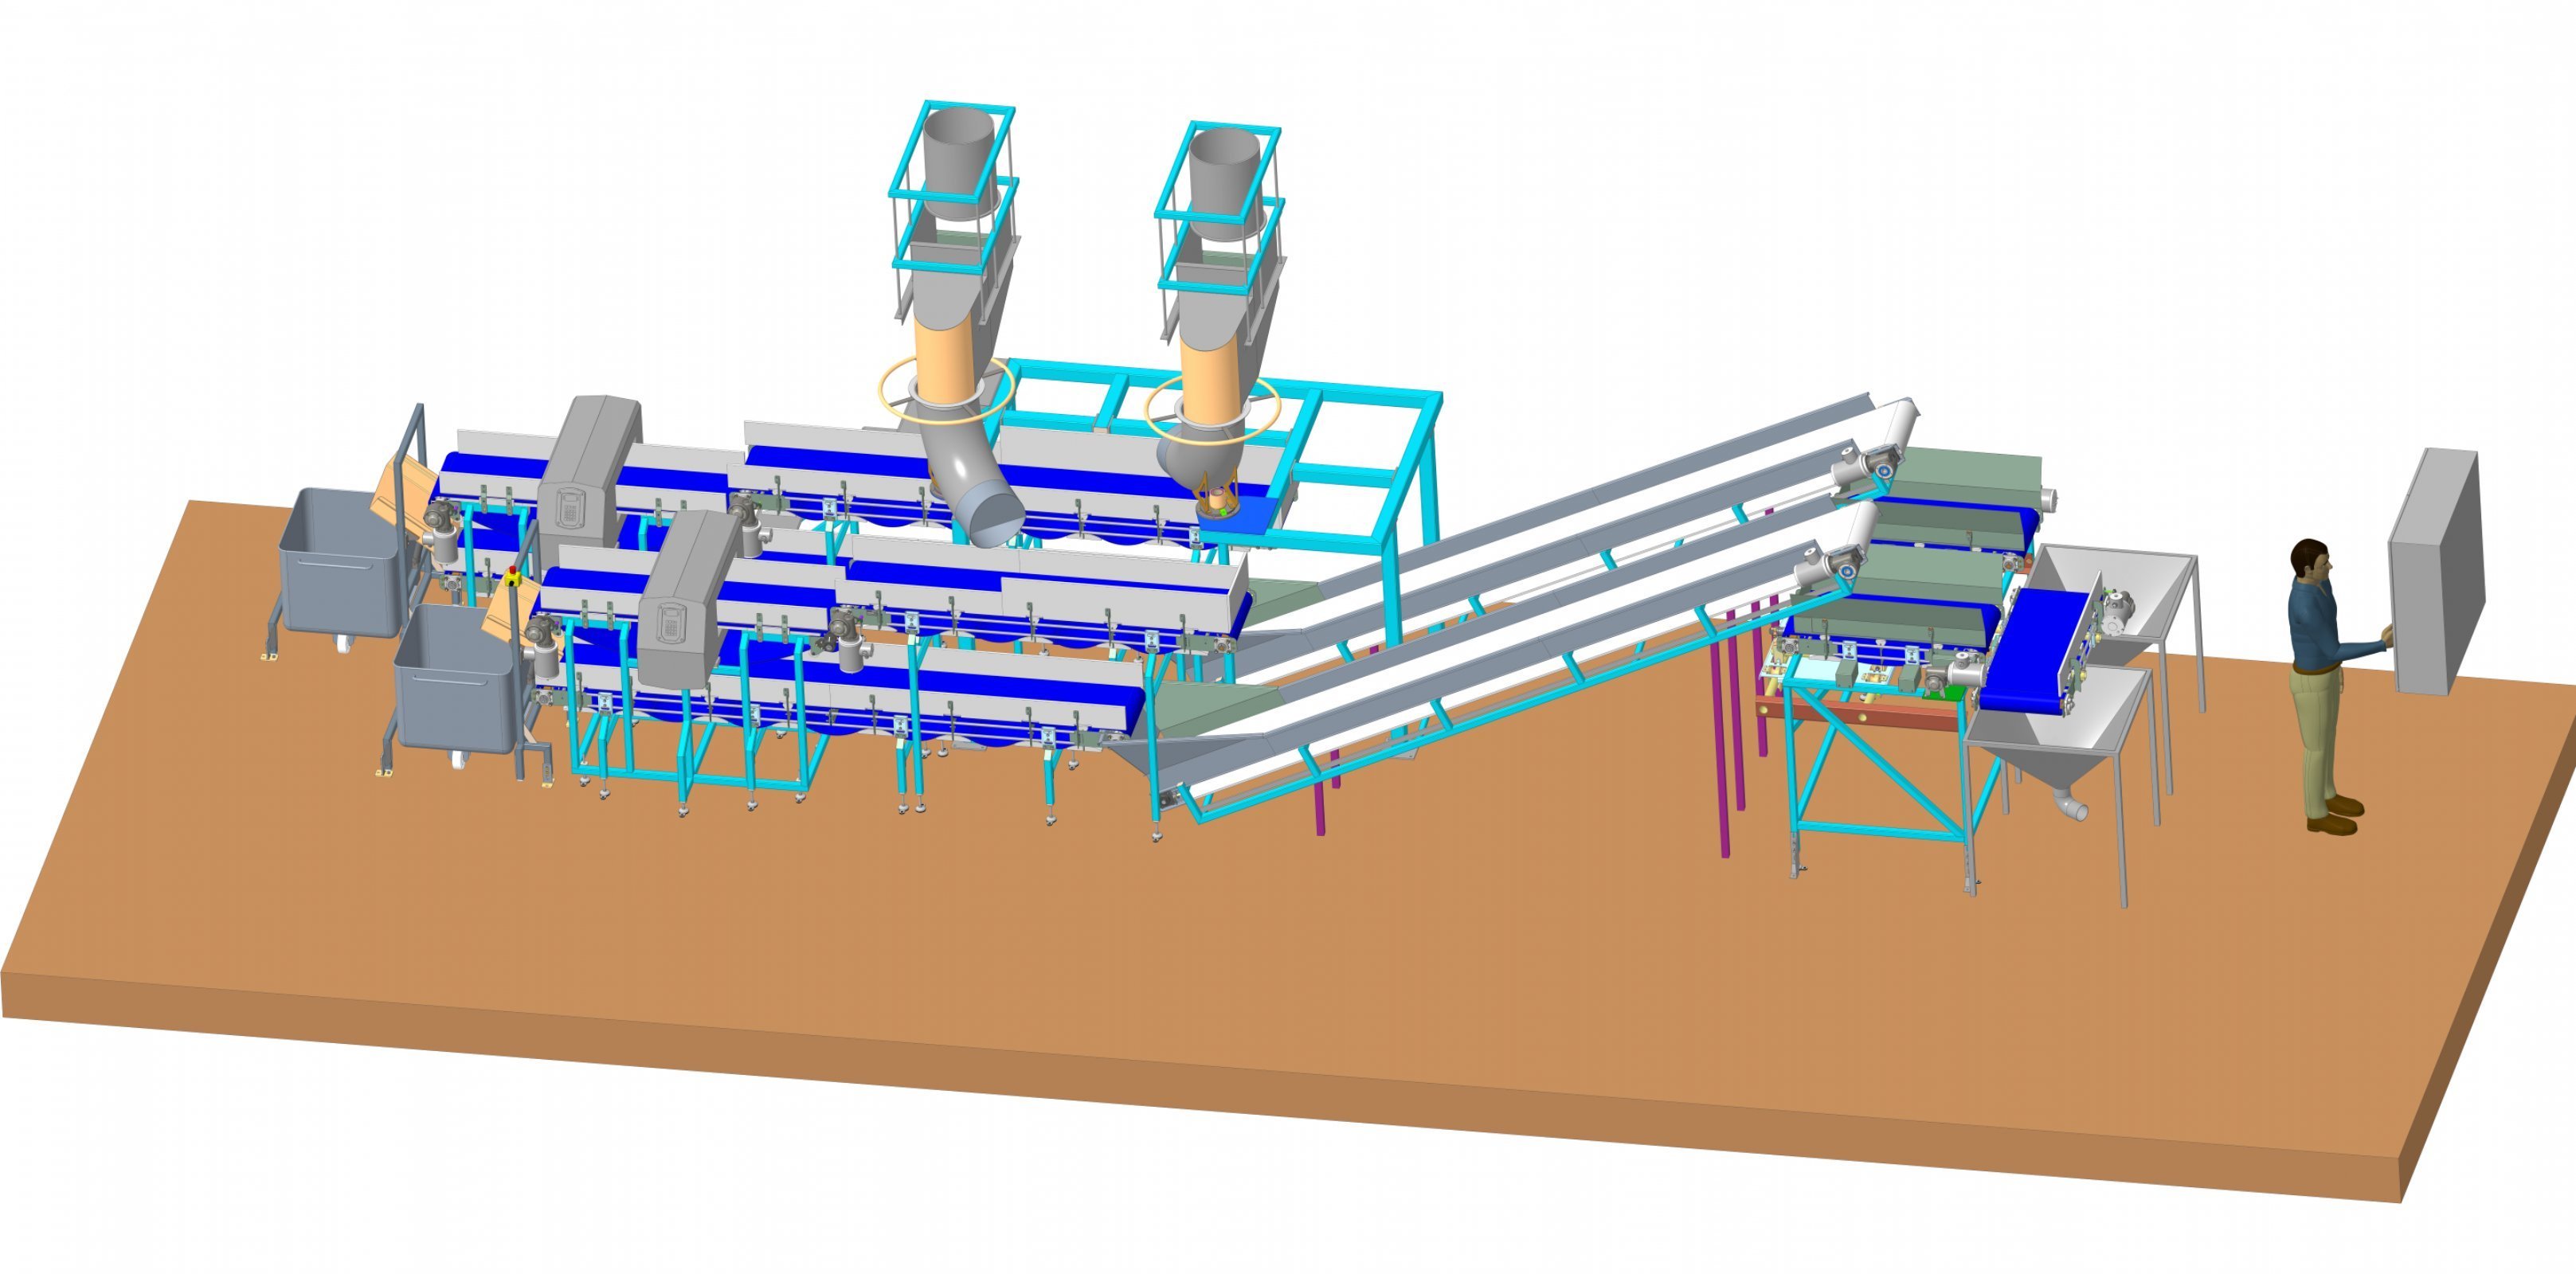 Remodeling and extension of the conveyor in the vacuum station